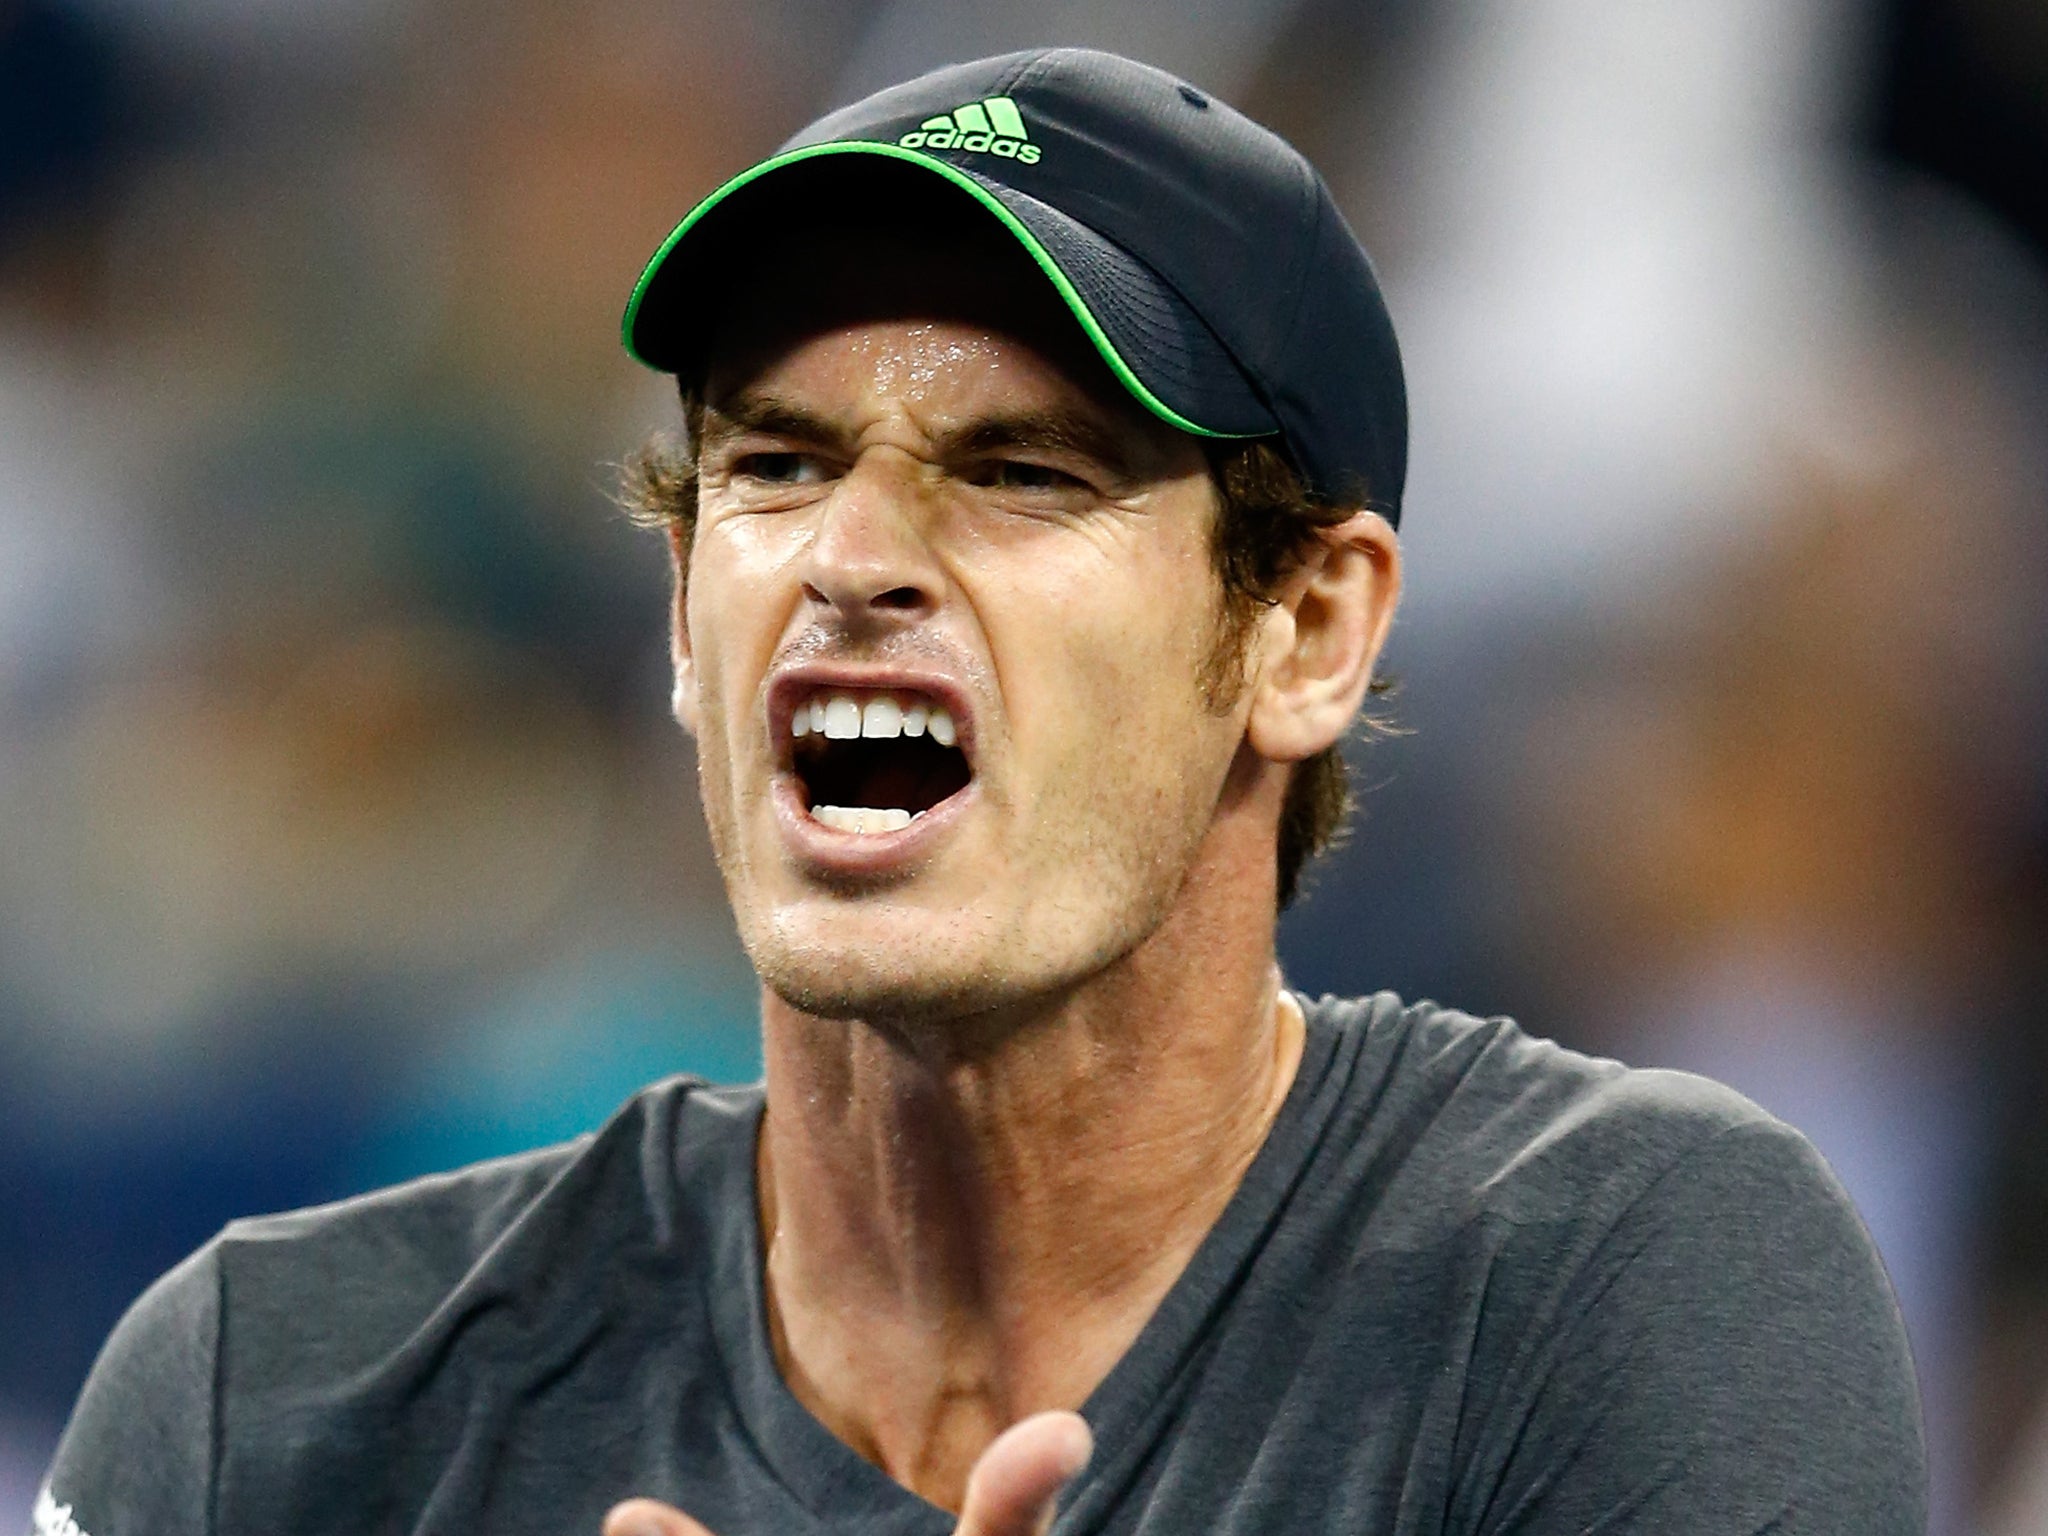 Andy Murray at the US Open earlier this year